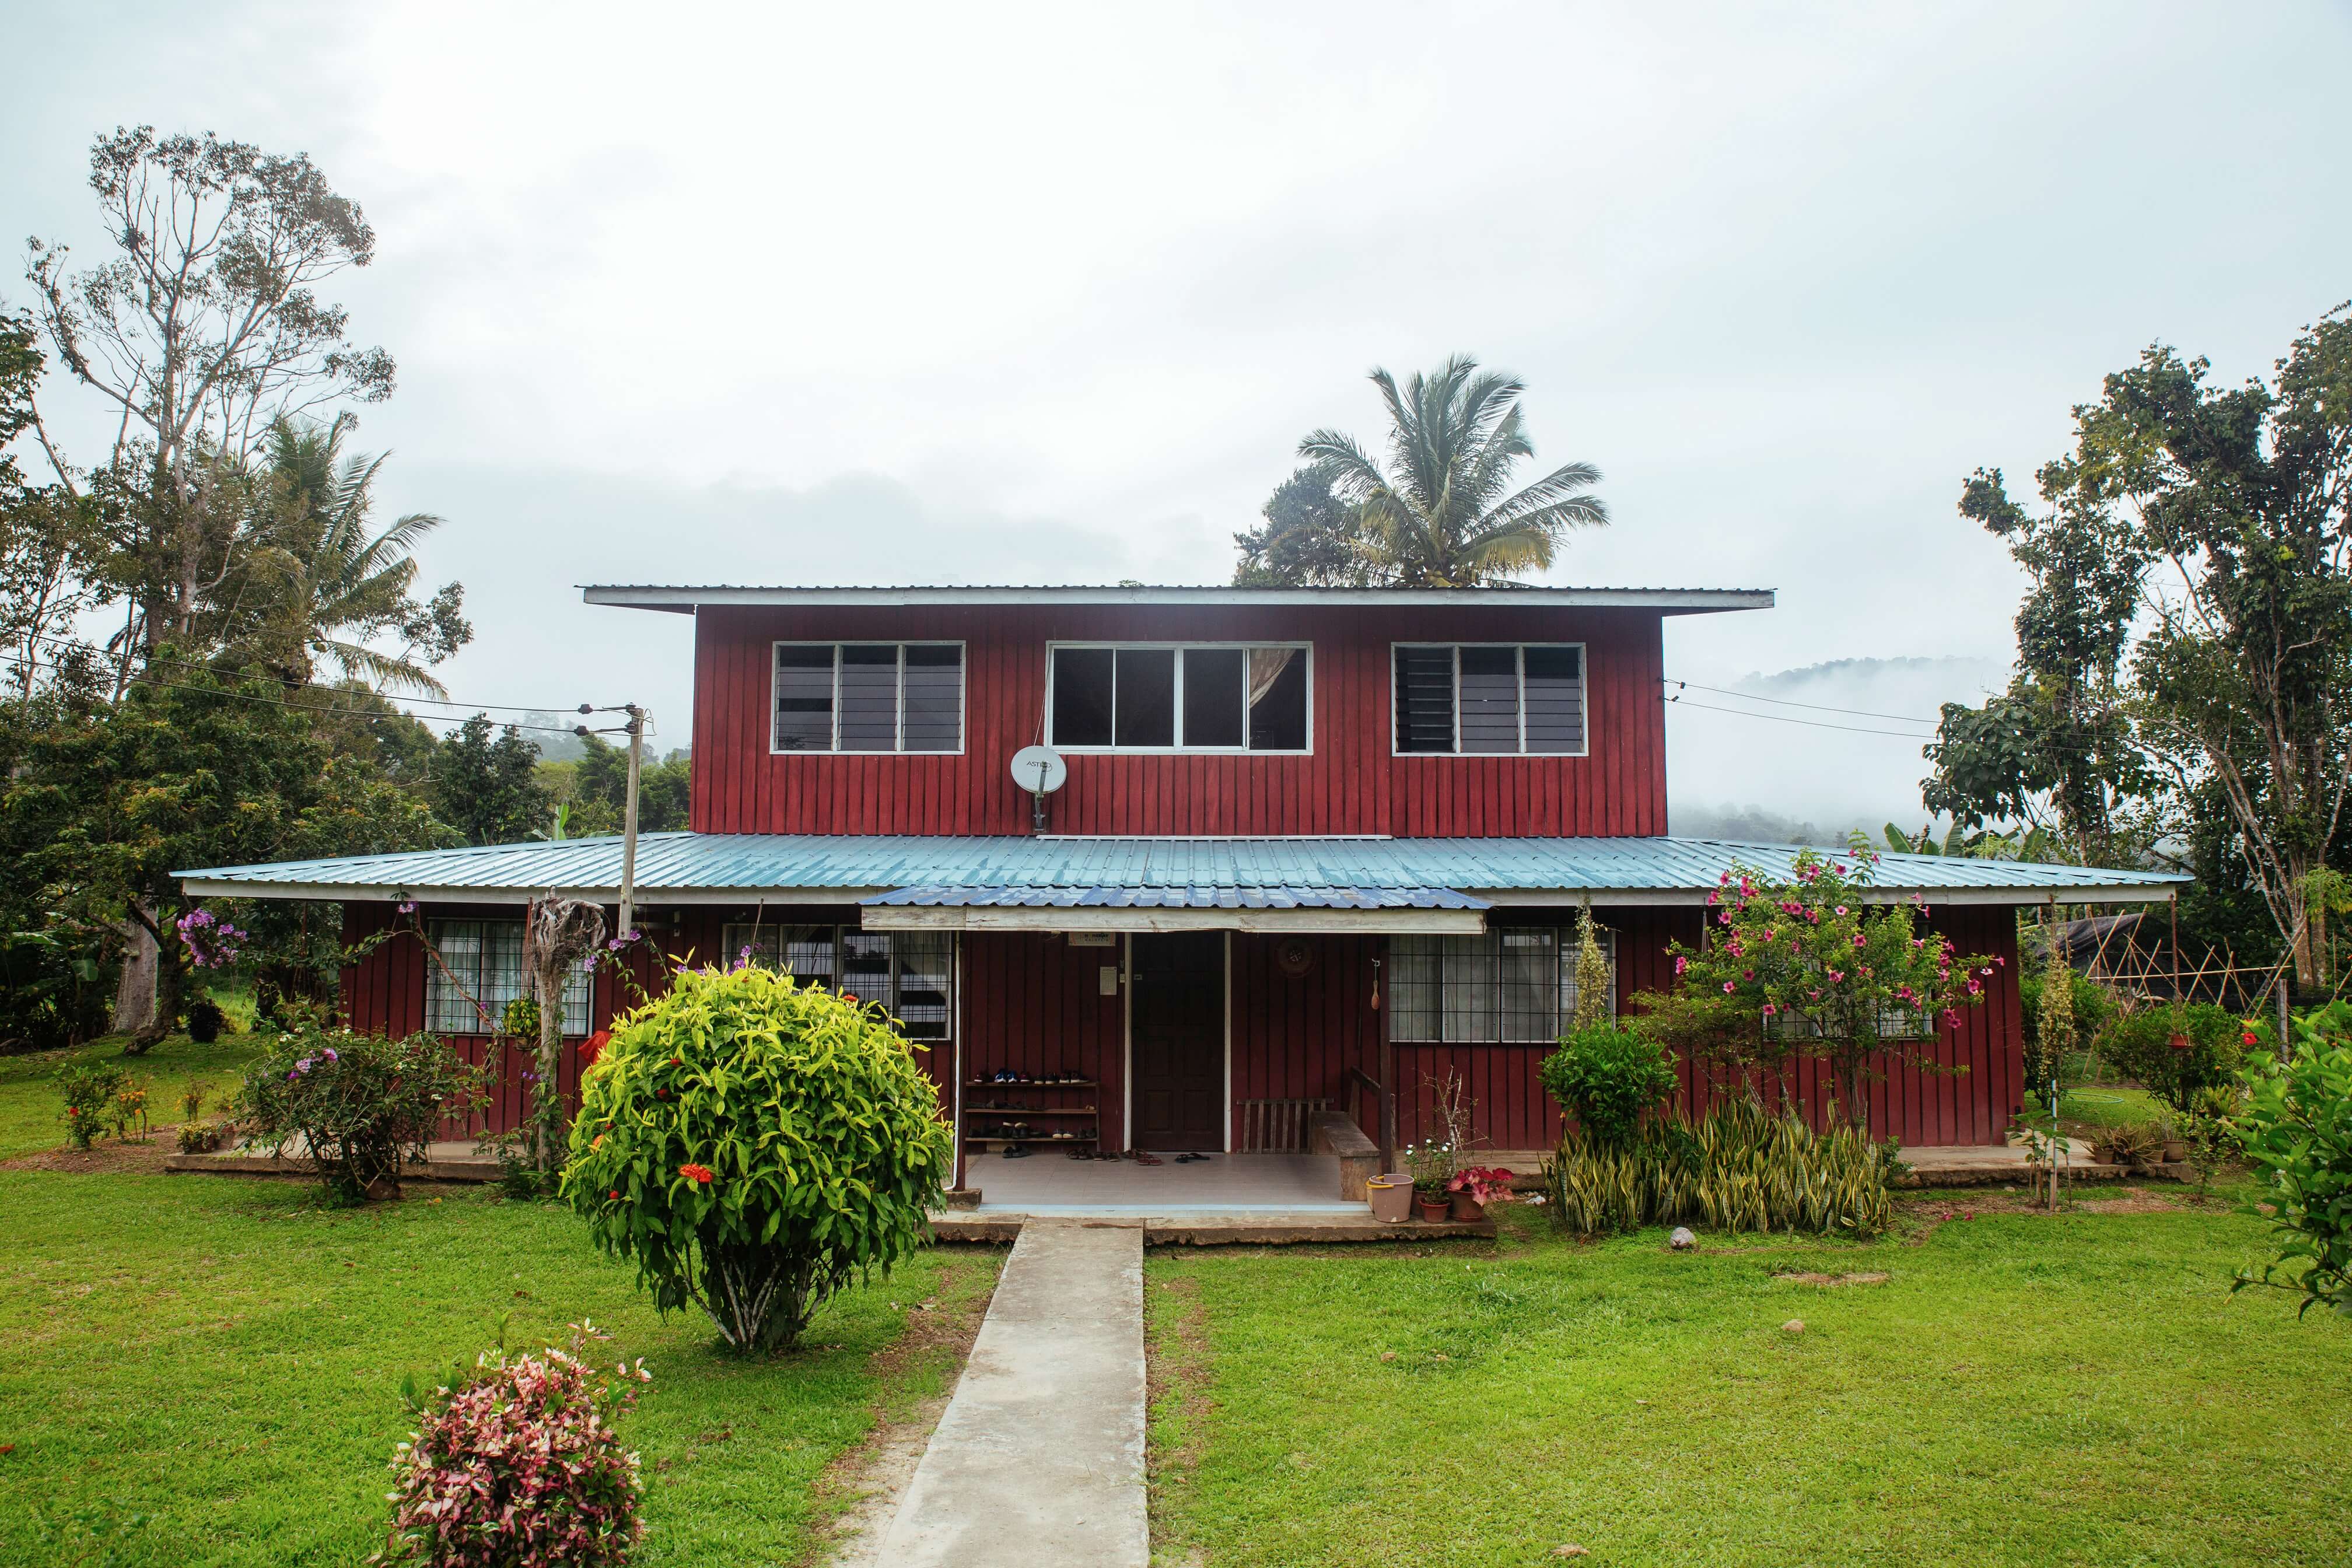 A two-storey house surrounded by a thriving garden, the home of Aunty Ribed, a Lun Bawang rice farmer living in Long Semadoh who has opened up her home for homestays. 